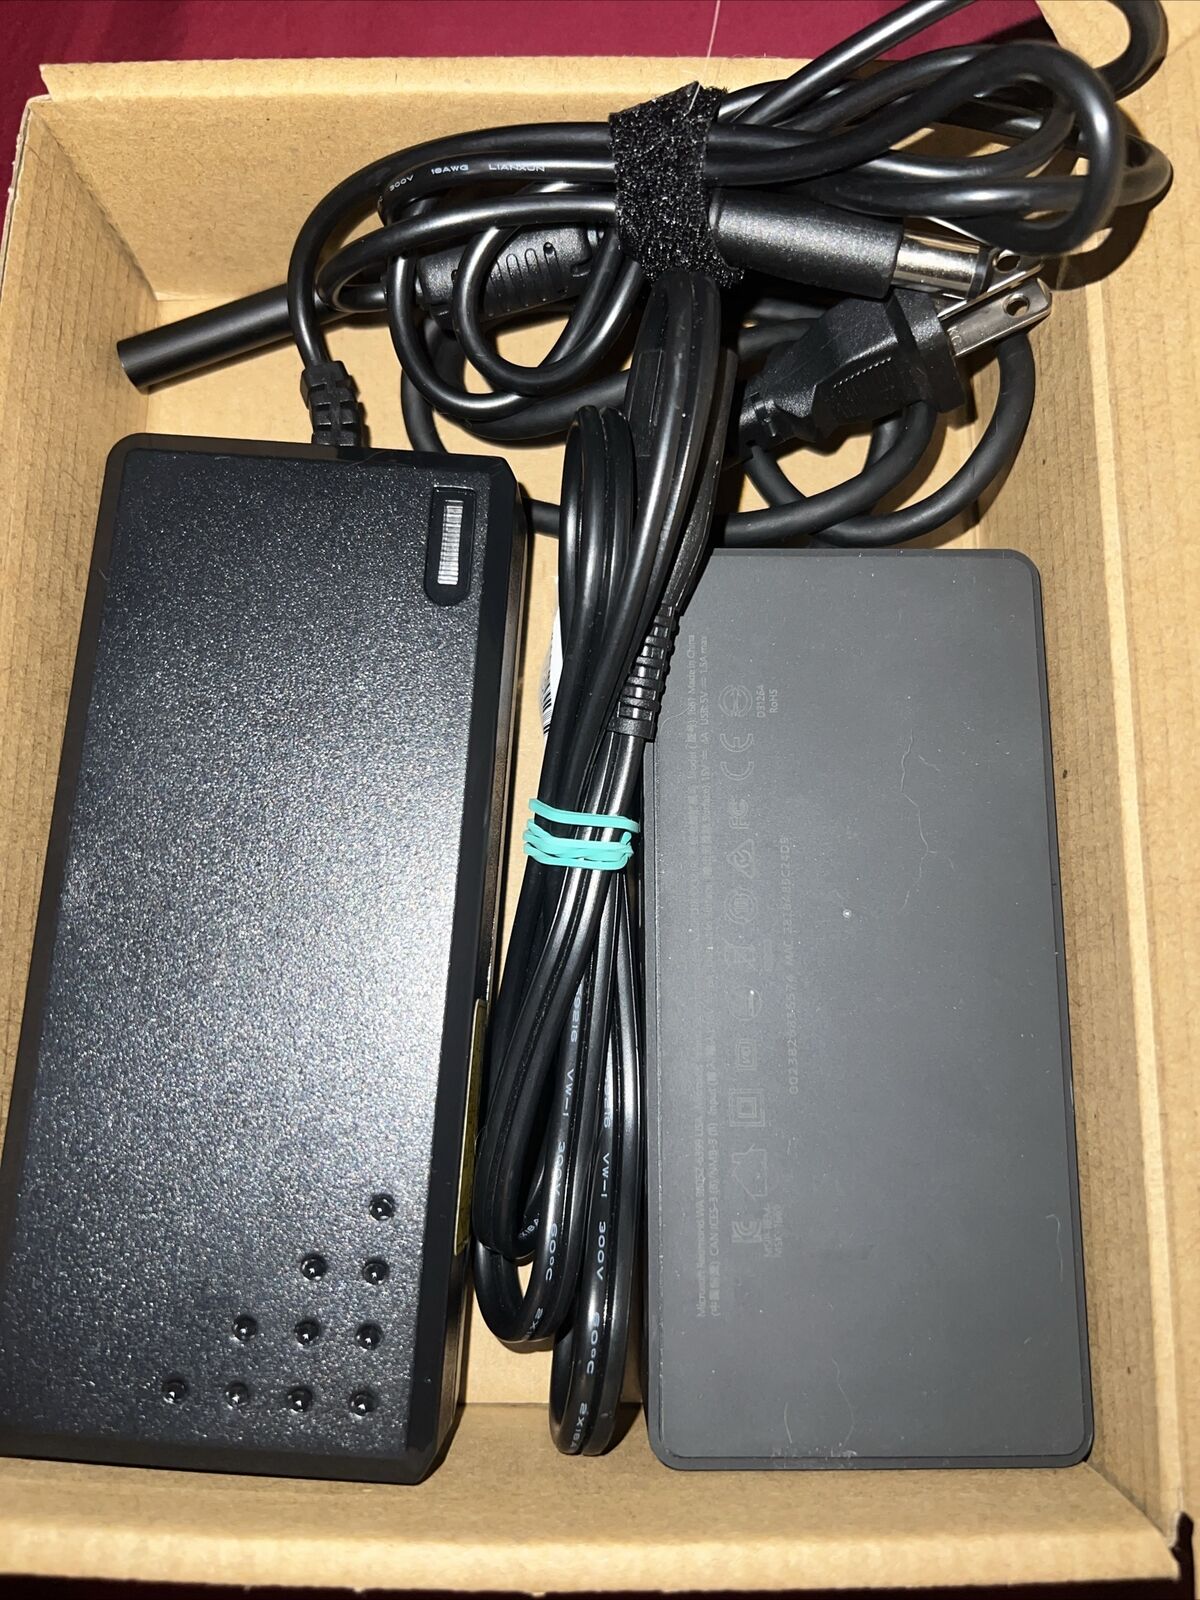 (1x) Genuine Microsoft Docking Station Surface/Pro Model:1661 With AC Adapter